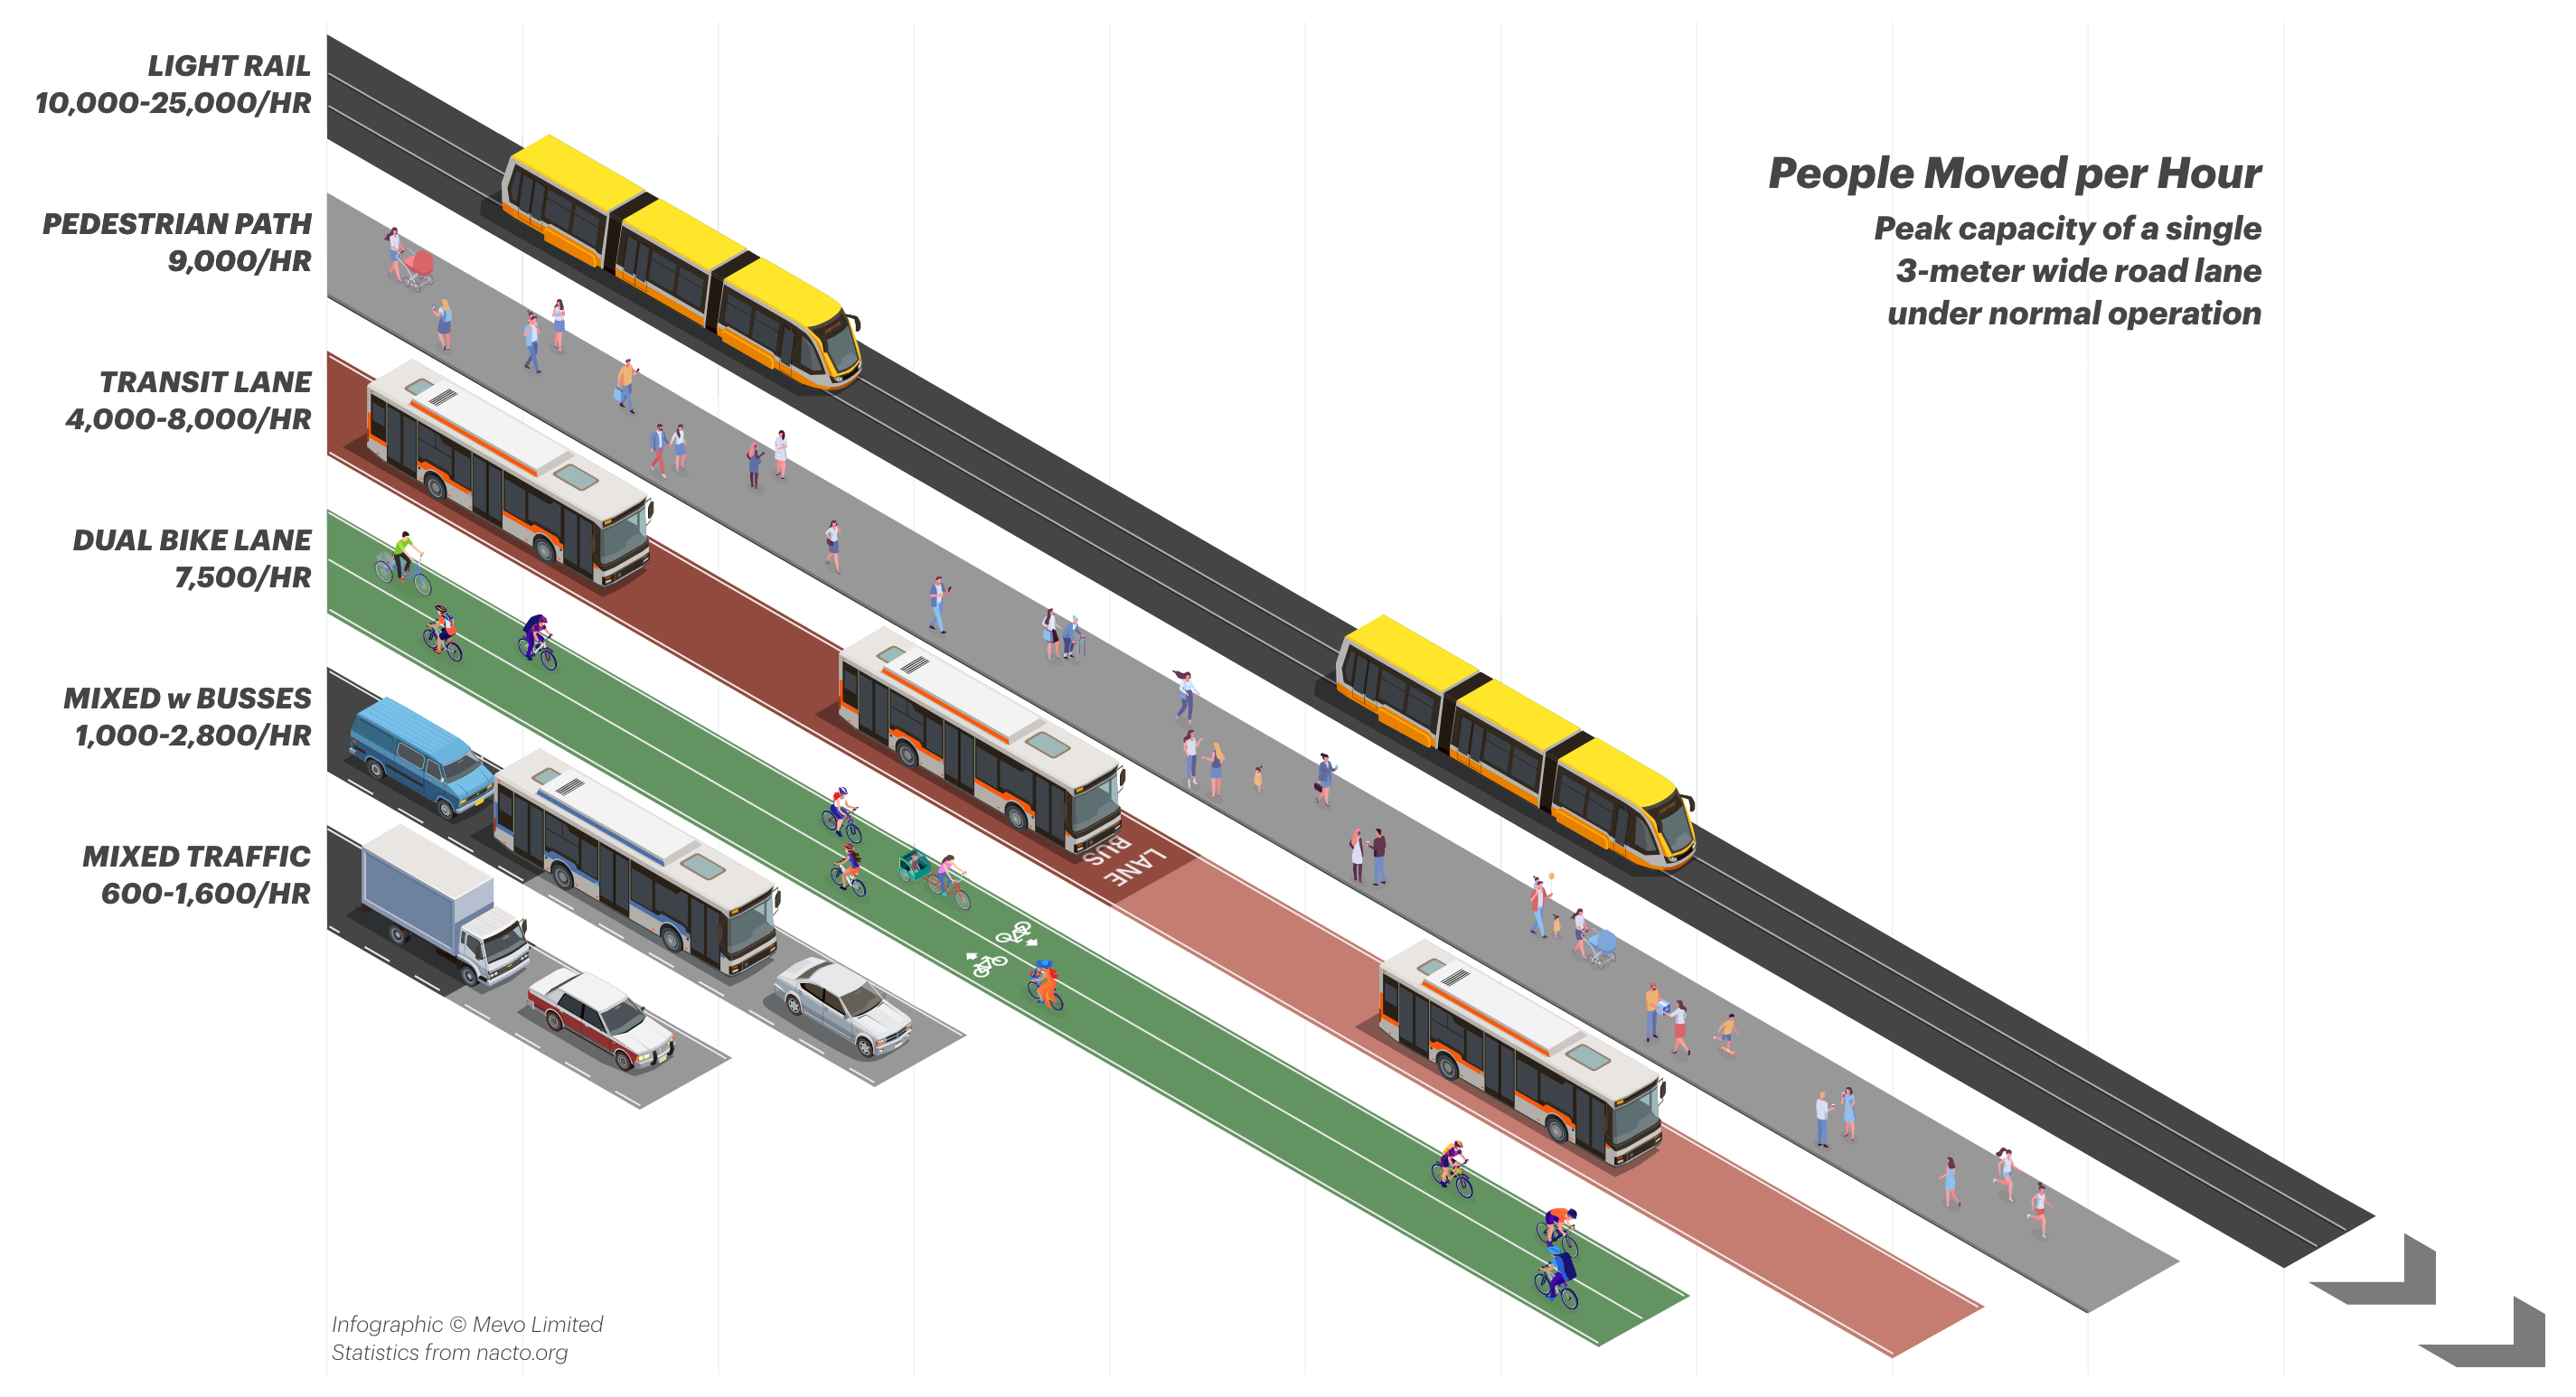 Infographic showing the capacity of different uses for a standard road lane.